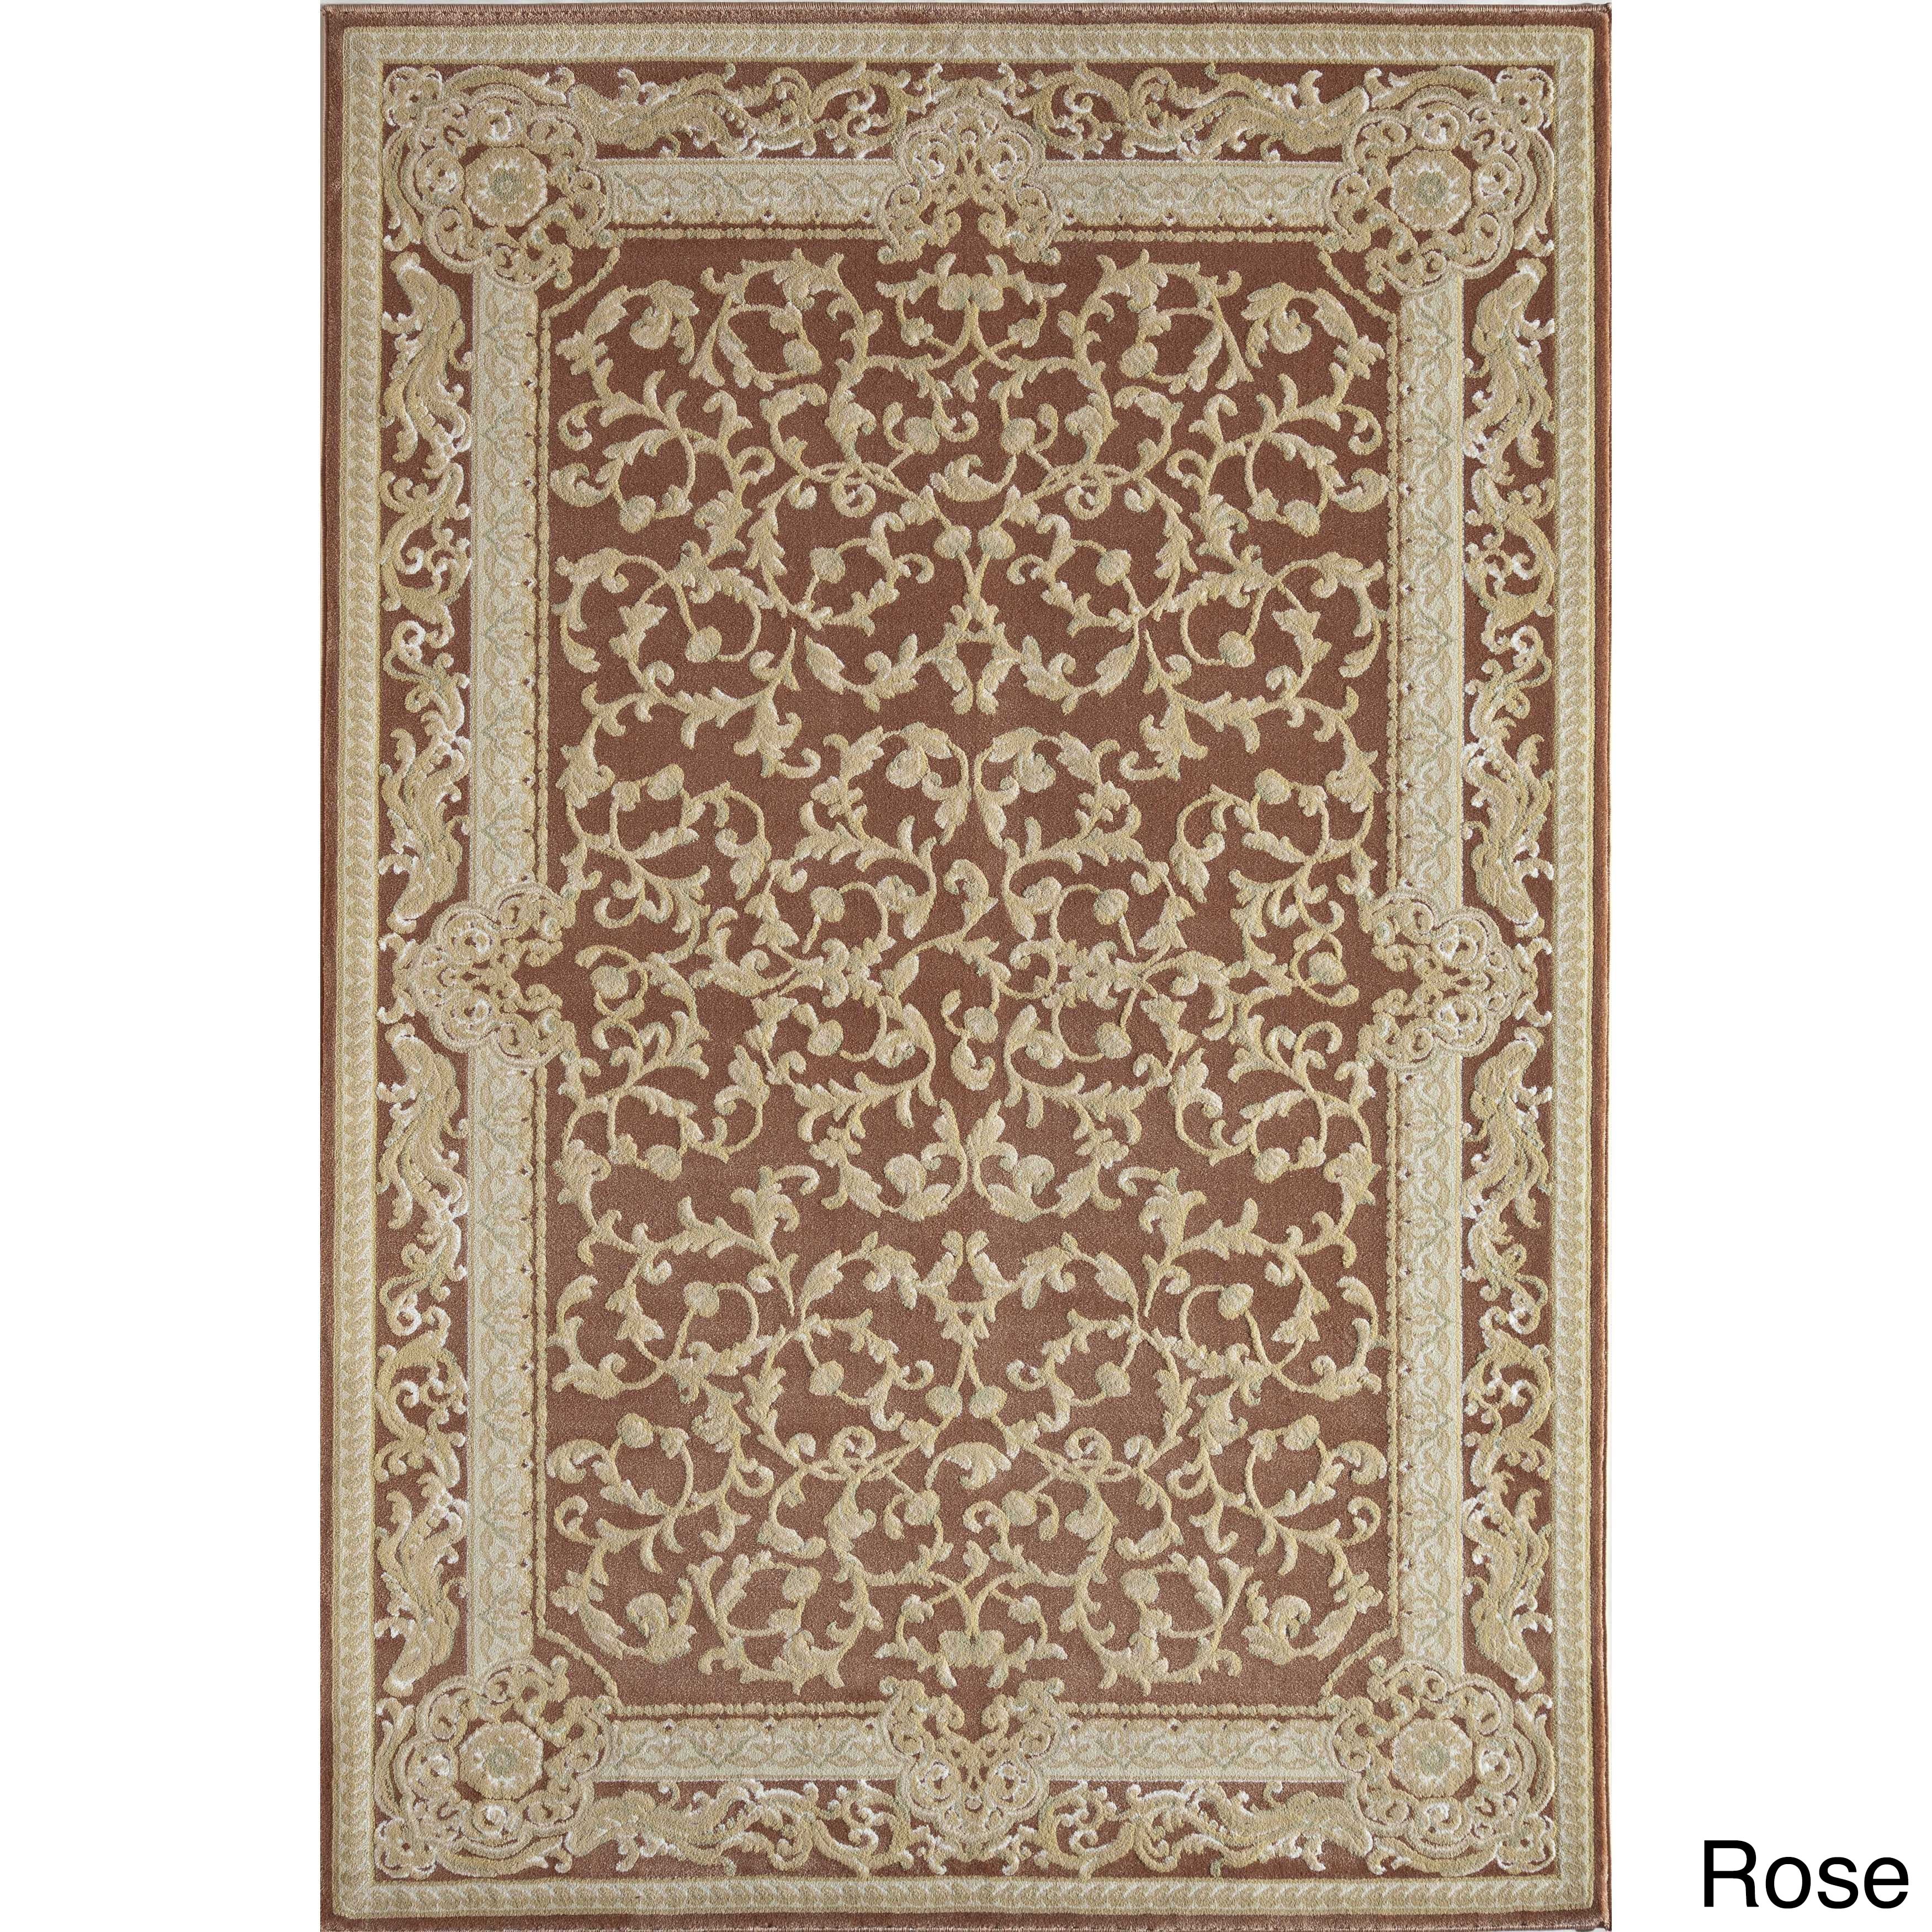 Rugs America Corp Verona Vines Floral Area Rug (710 X 1010) Green Size 710 x 1010